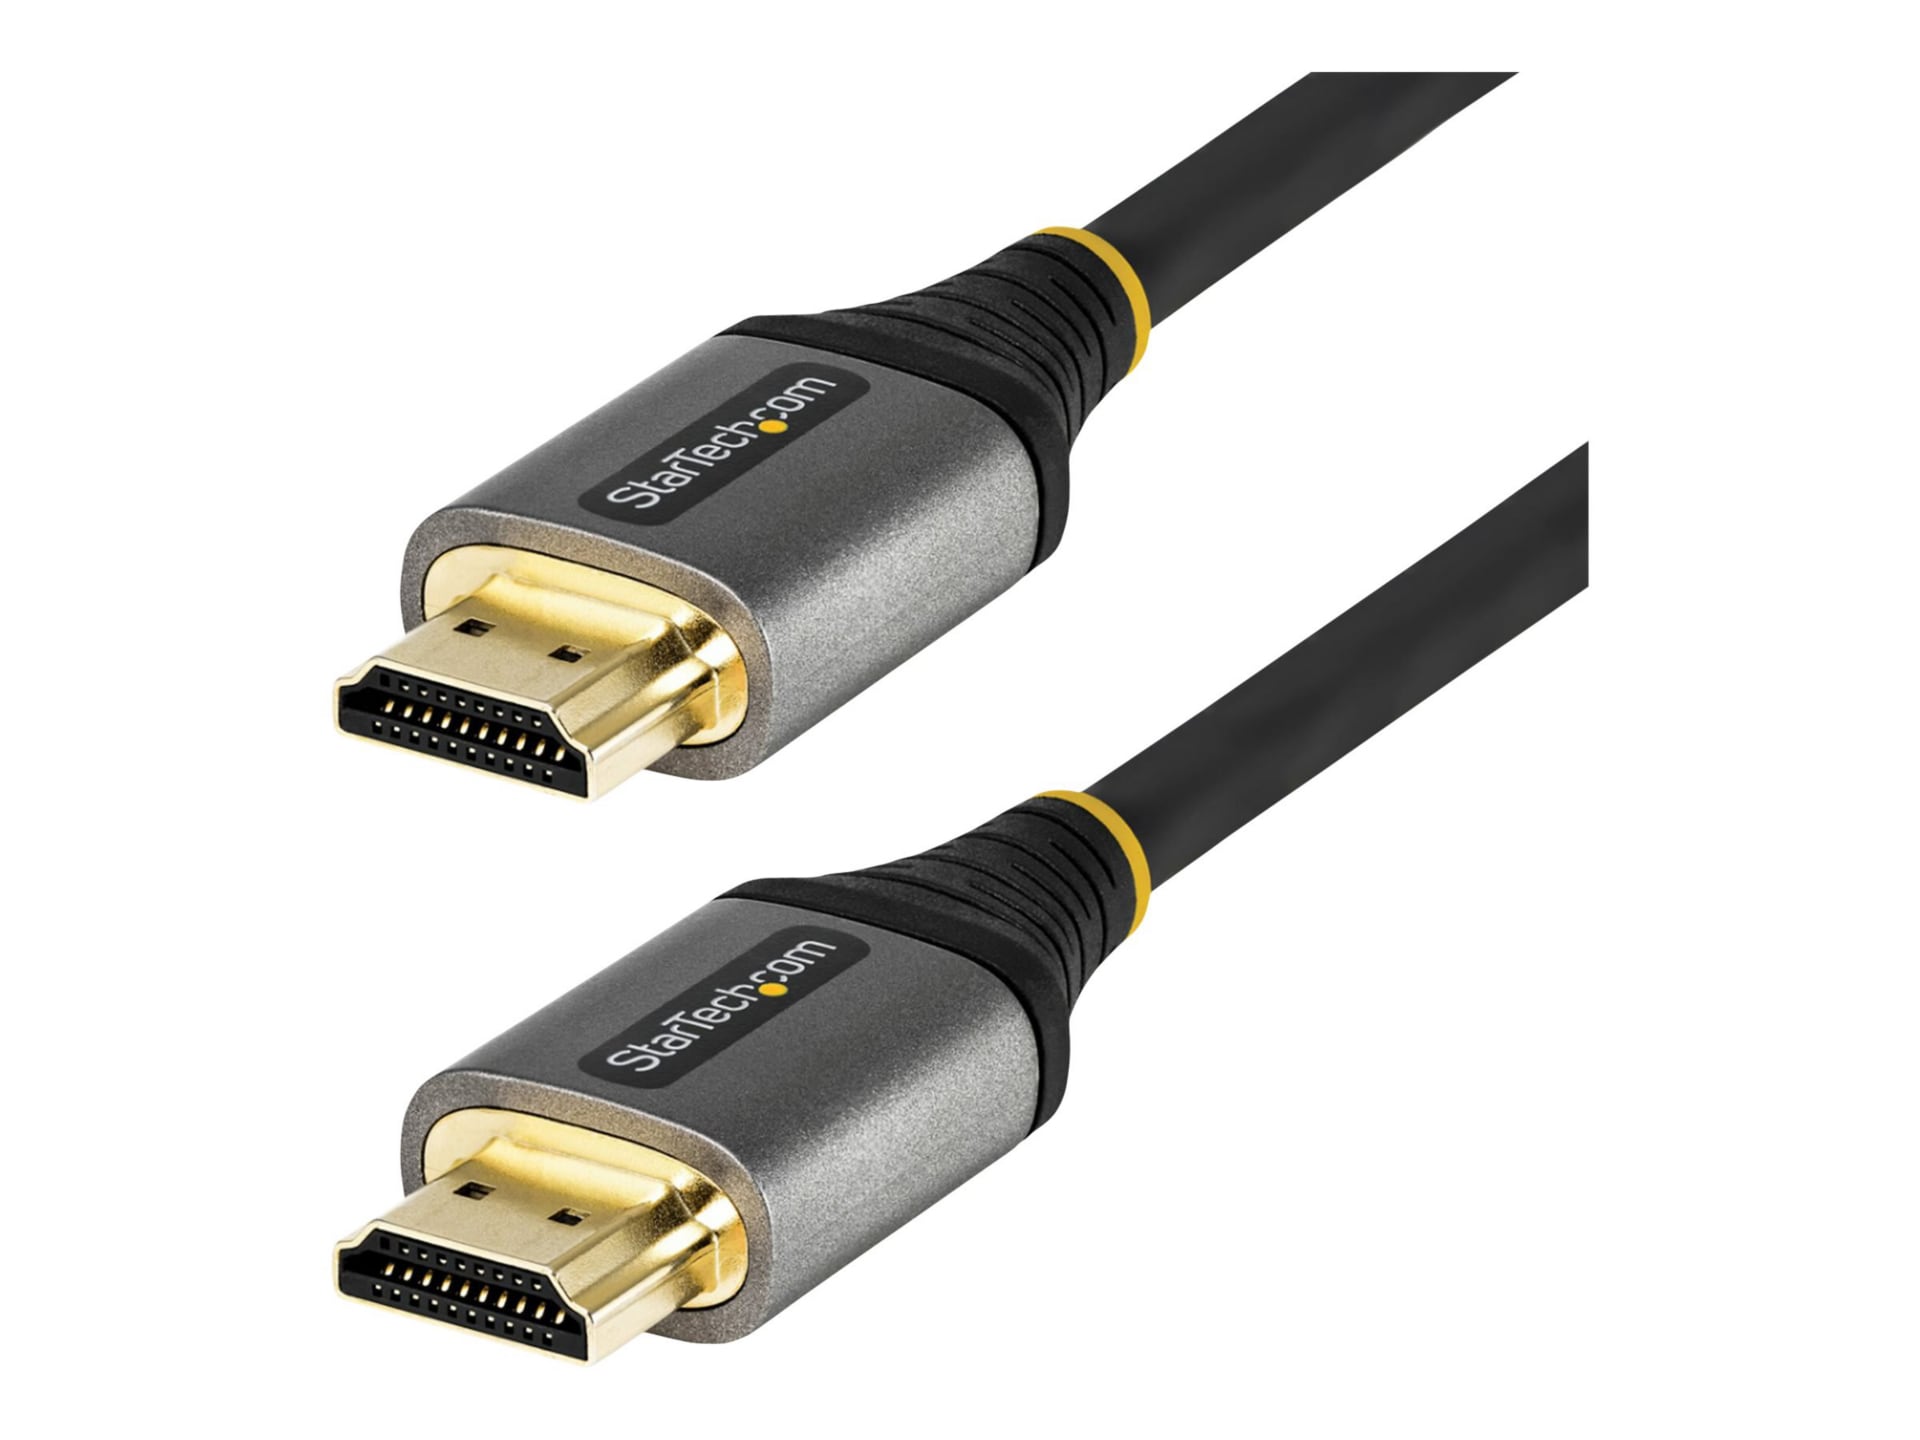 StarTech.com 3ft (1m) Premium Certified HDMI 2,0 Cable, High Speed Ultra HD 4K 60Hz HDMI Cable with Ethernet, HDR10, UHD